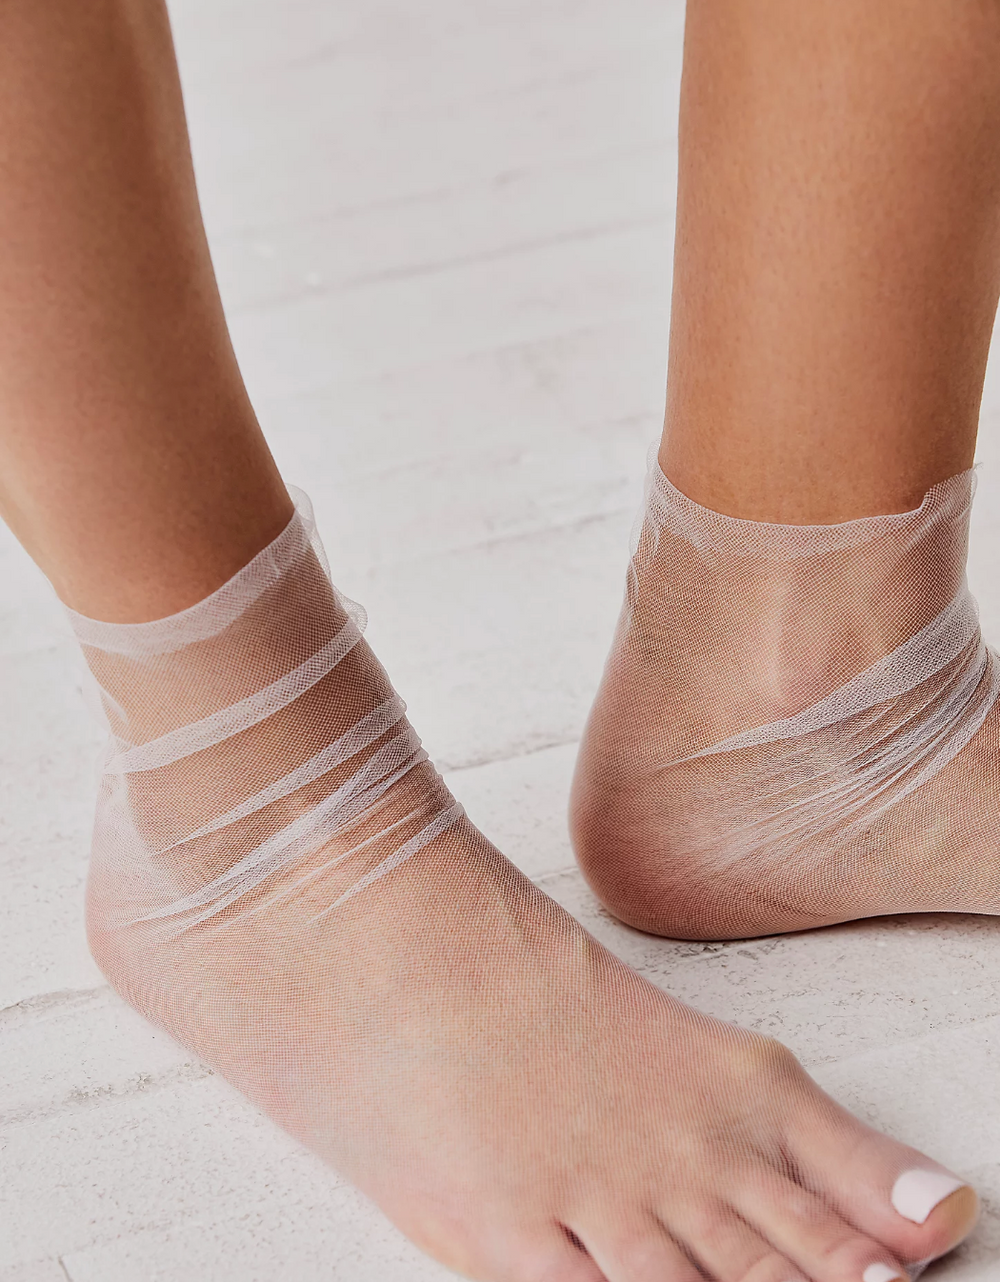 Free People The Moment Sheer Ankle Socks in White or Black